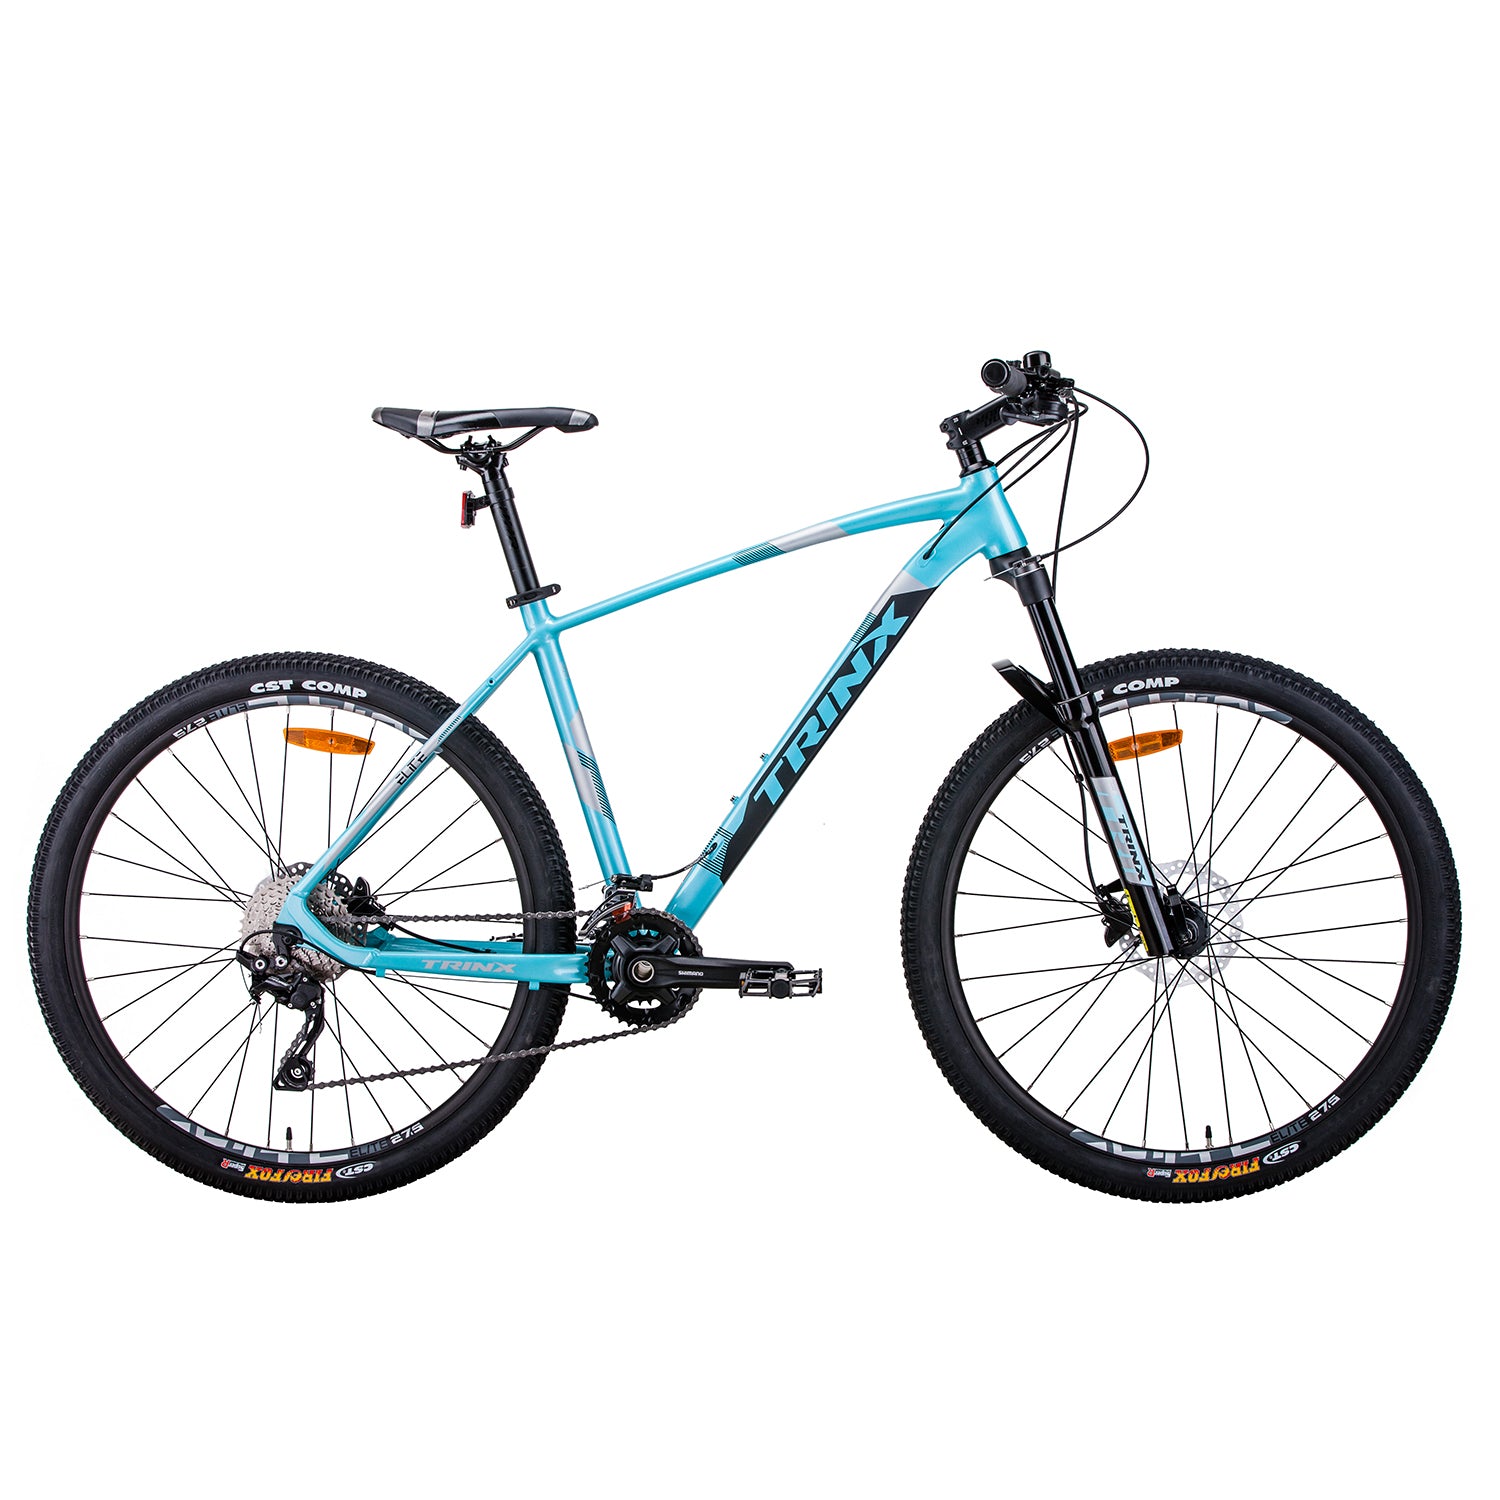 Trinx X7 Elite 27.5 Inch MTB Mountain Bicycle Shimano Deore 20 Speed 21 Inches Frame